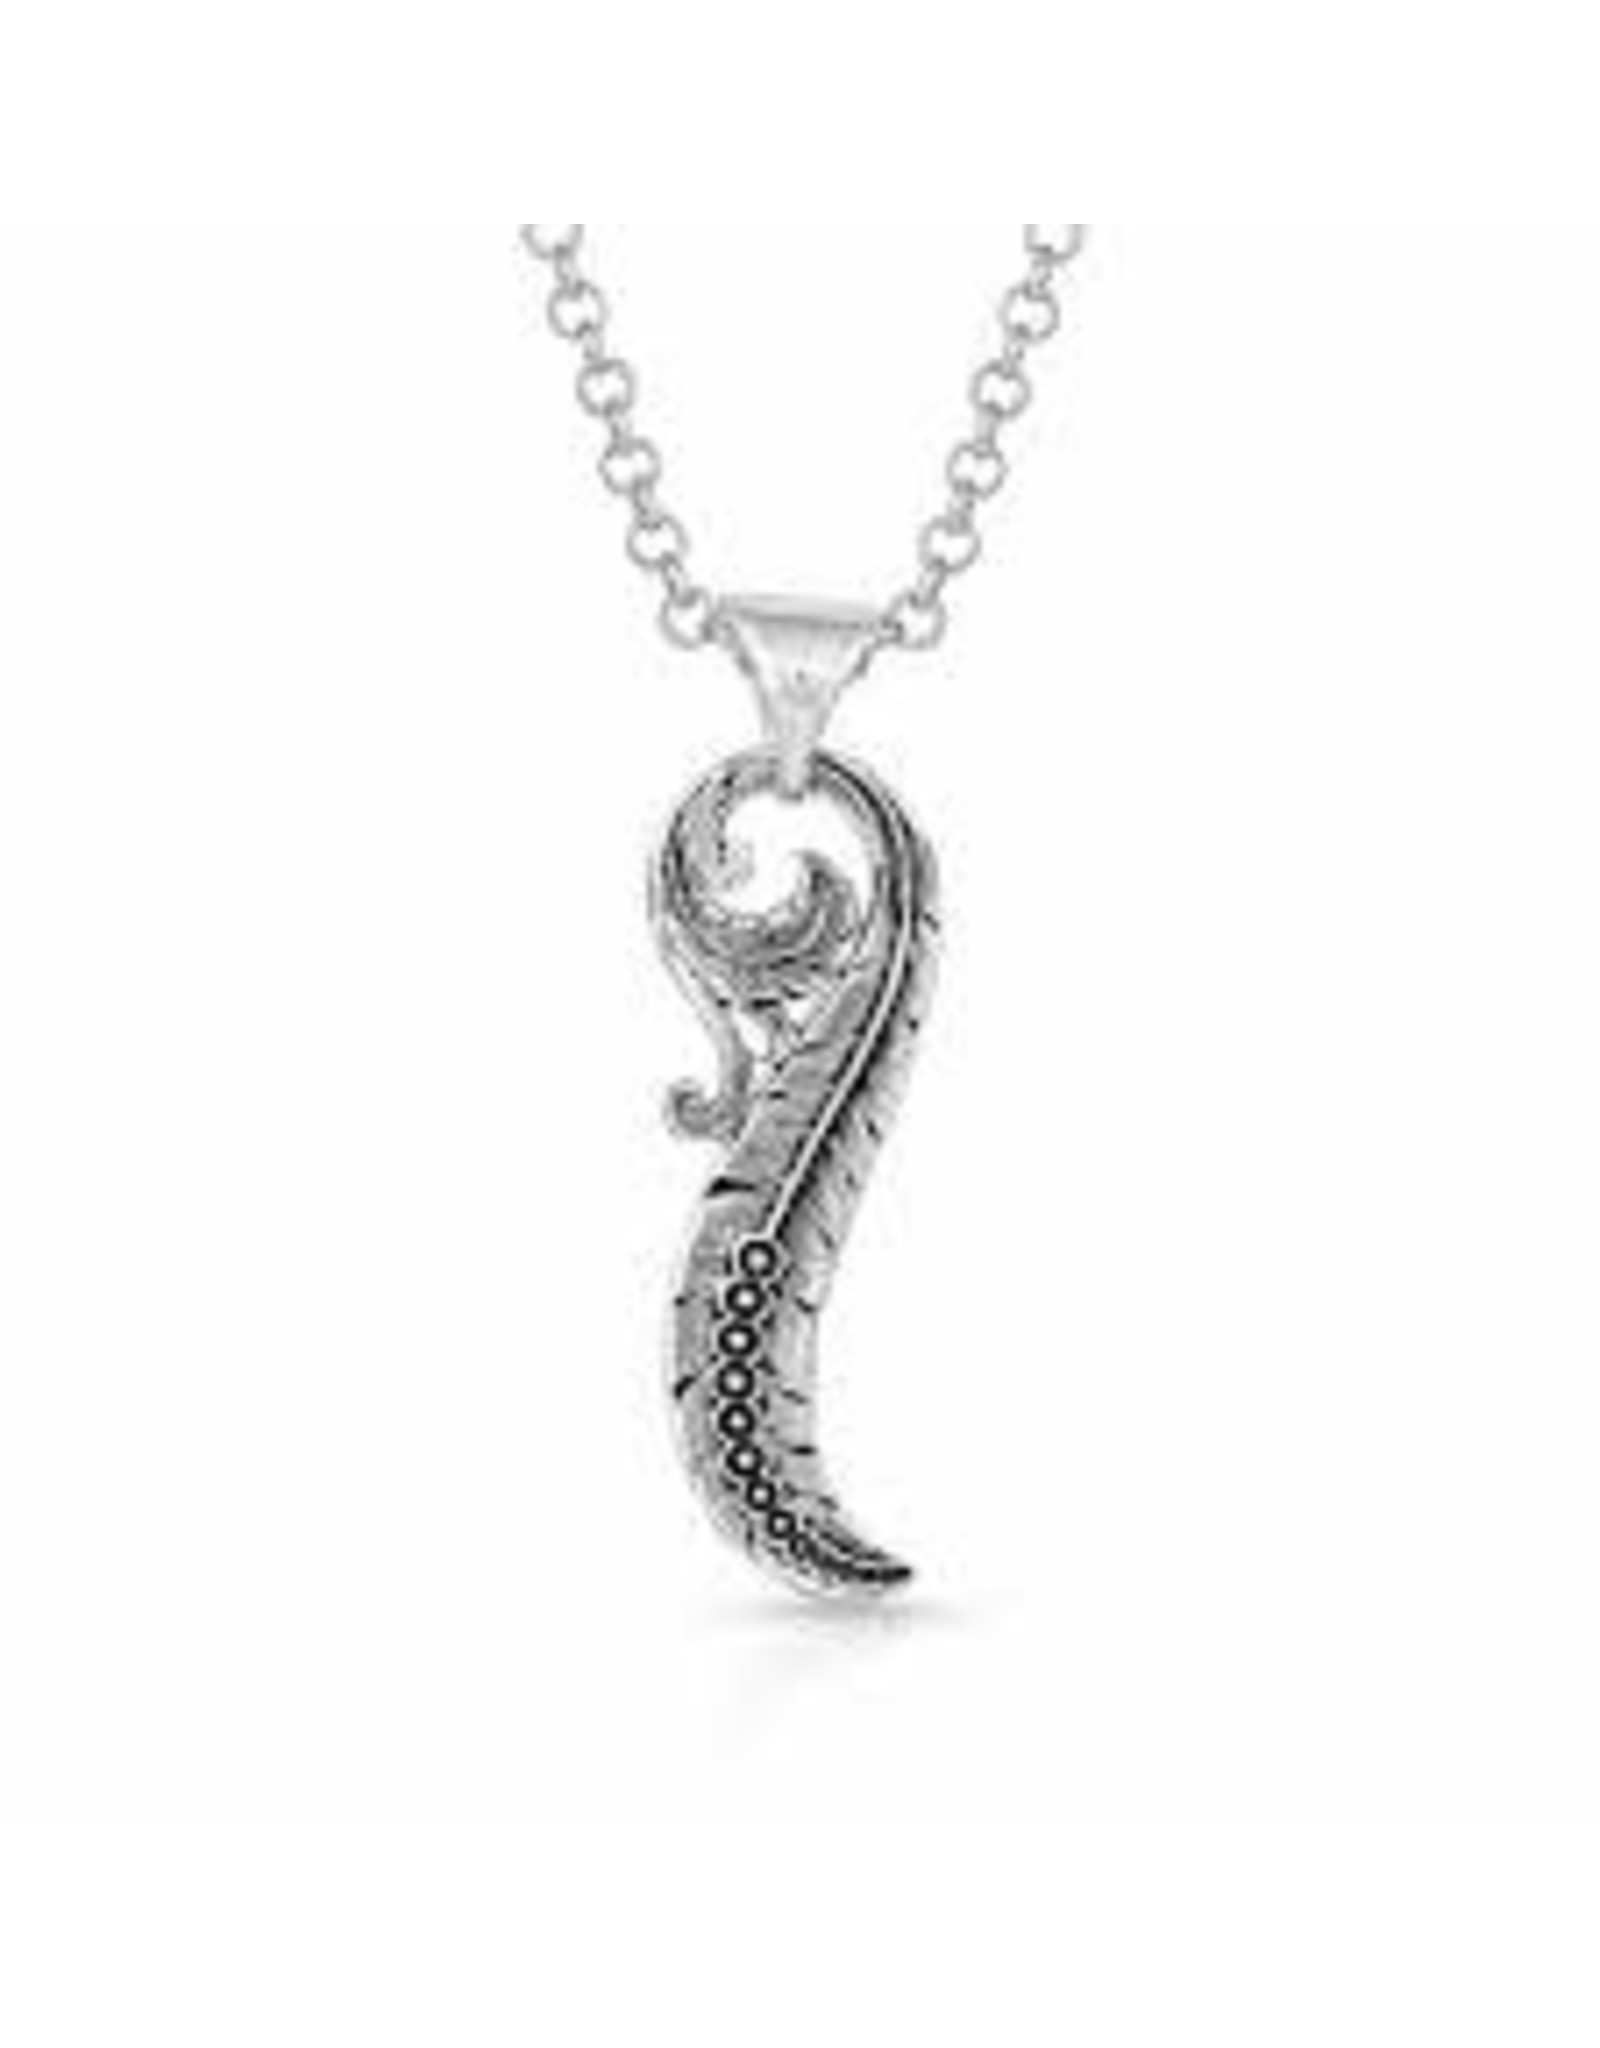 Montana Silversmith Necklace Intwined Feathered -Silver-Blk - NC4837 - Montana Silversmiths